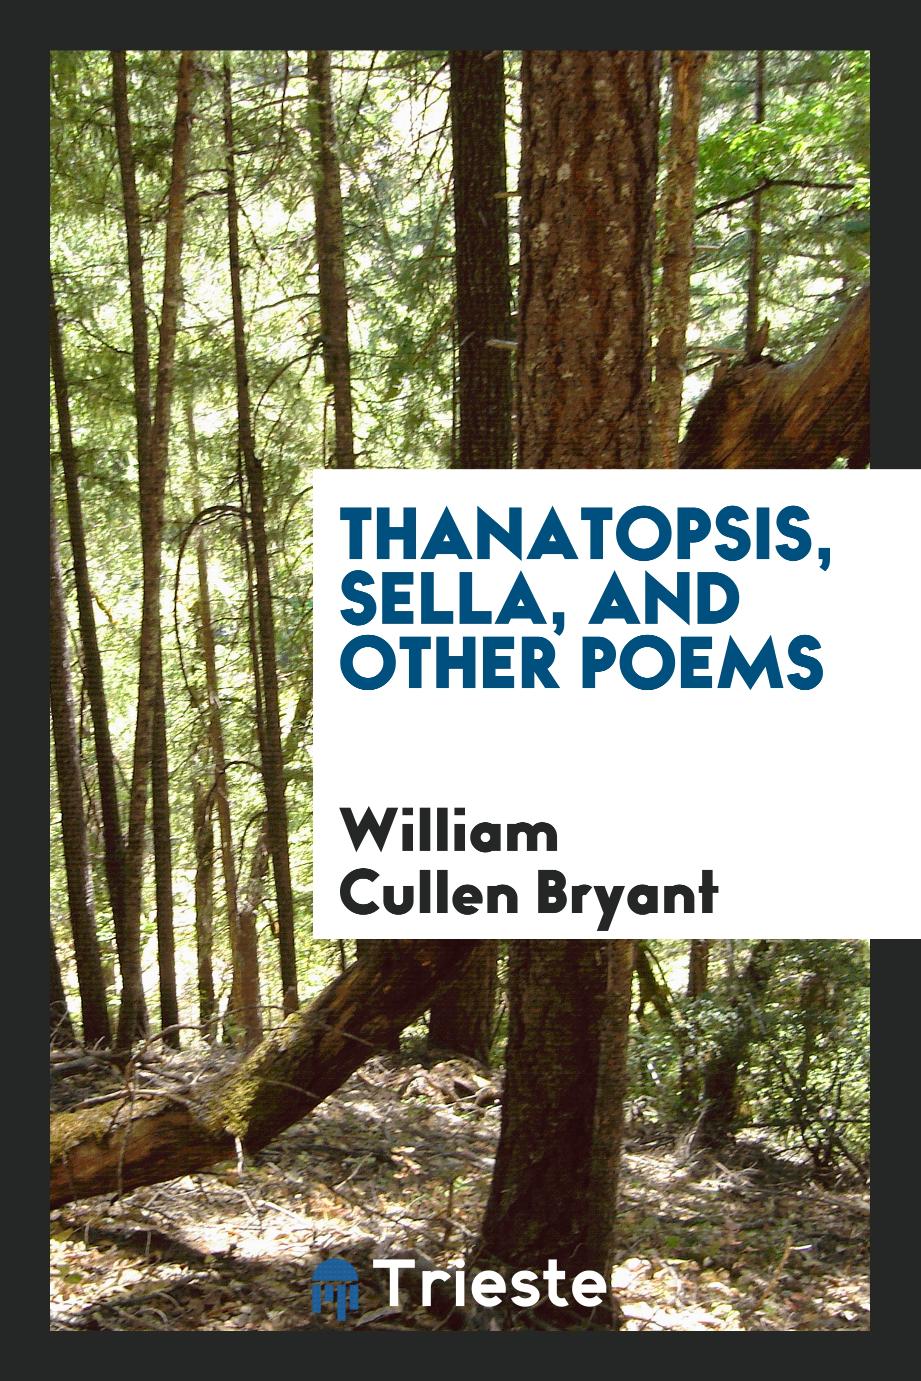 Thanatopsis, Sella, and other poems